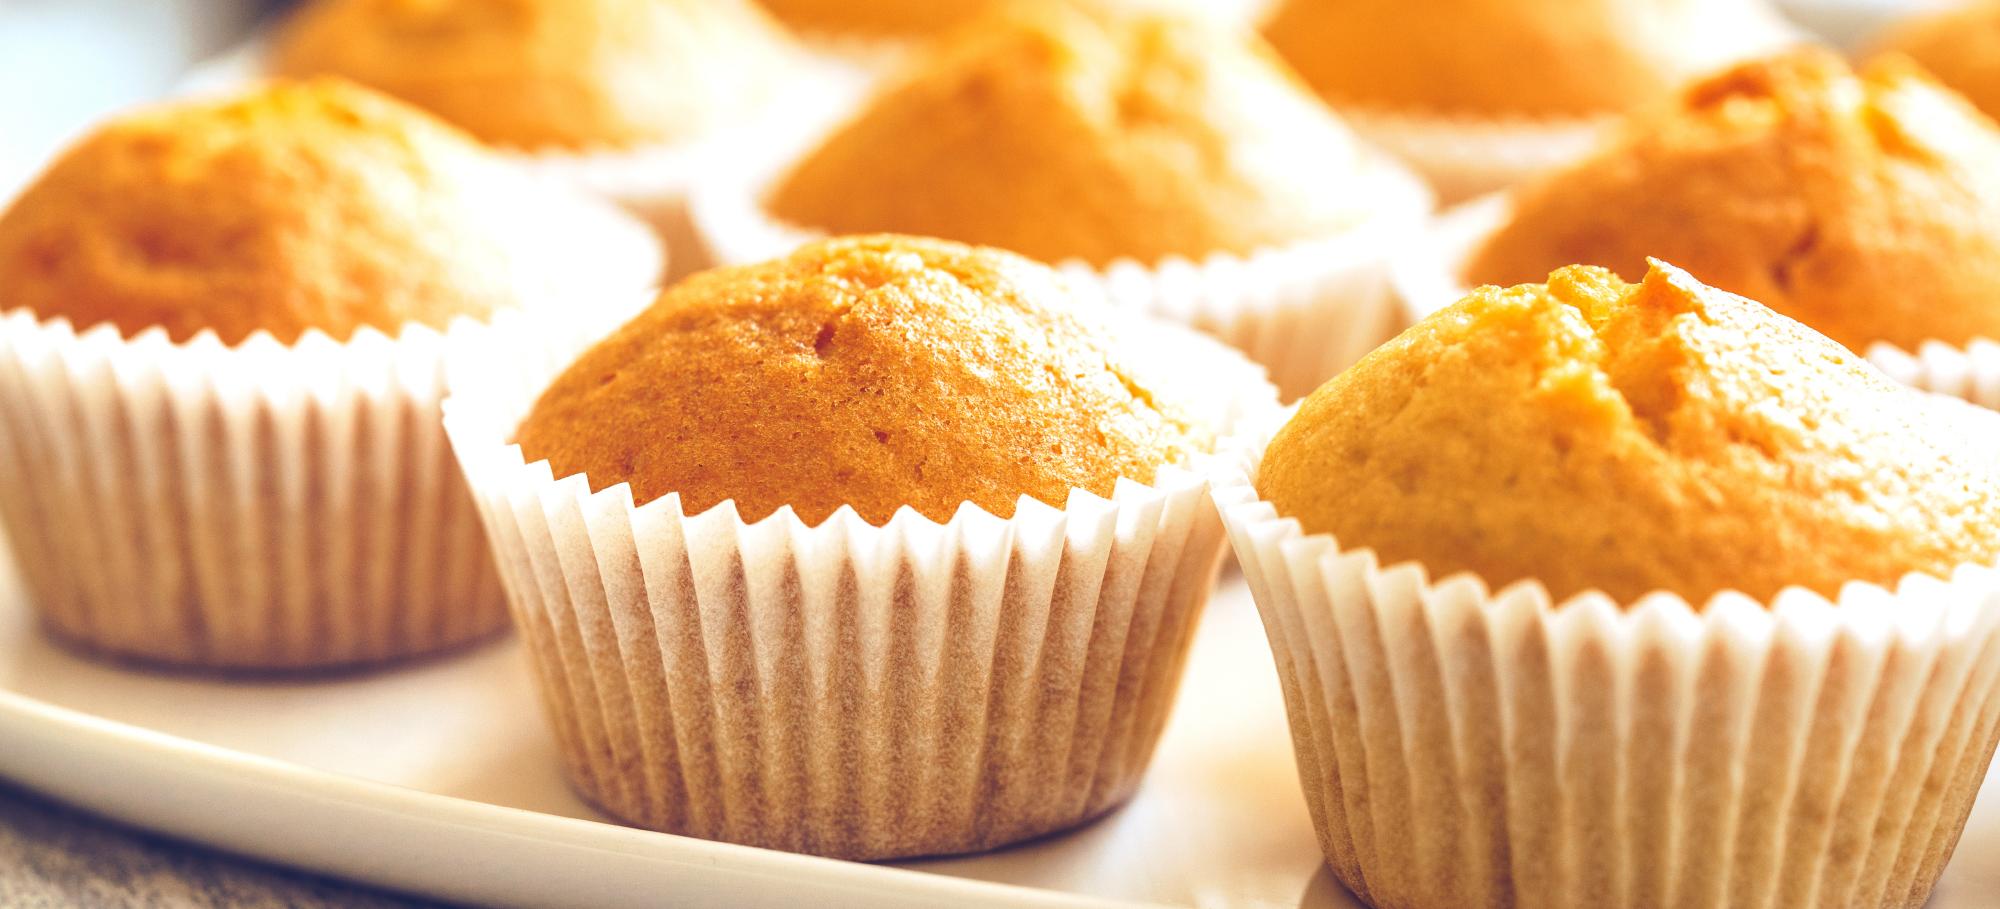 Muffins pomme carottes